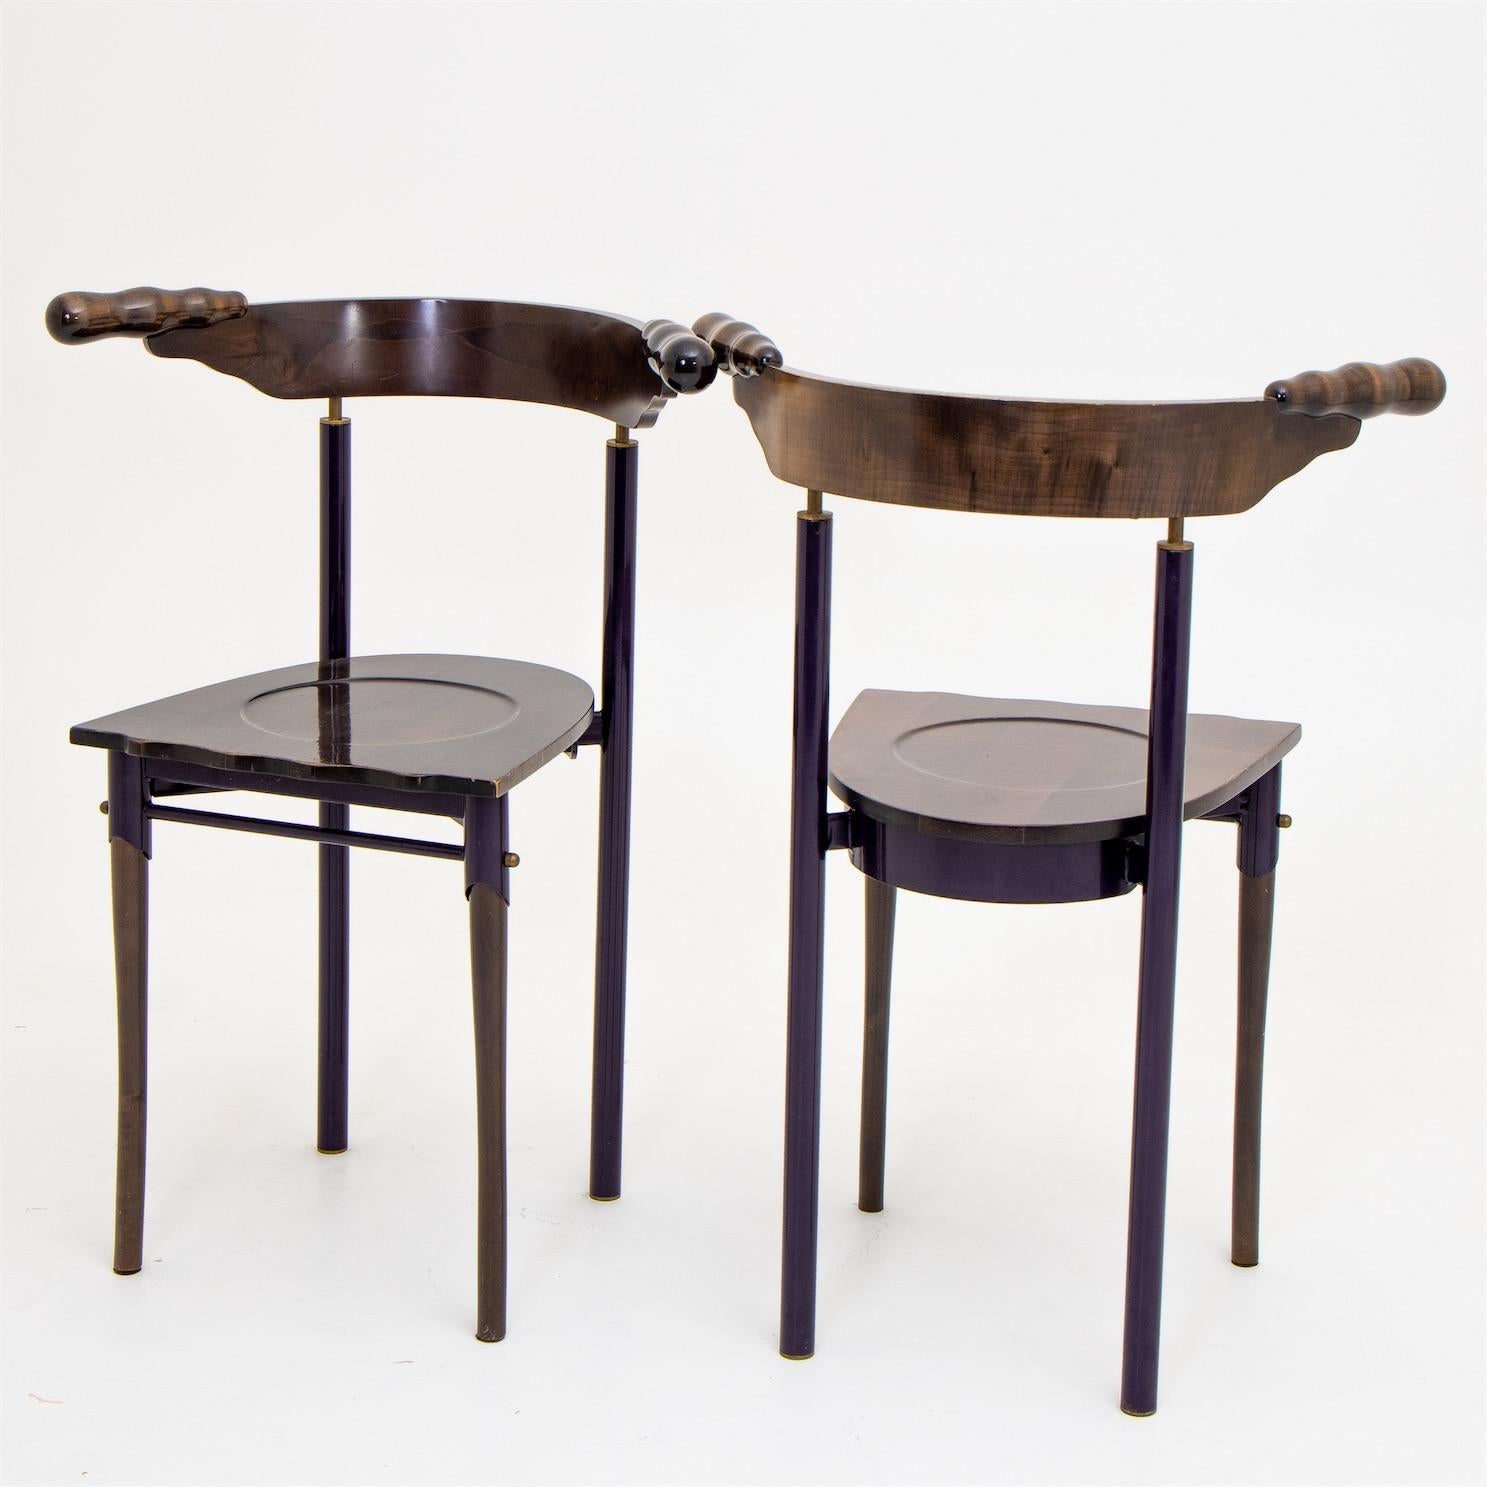 Two designer chairs designed by Borek Sipek for Driade in Italy. The backrest, seat and front legs are made of wood, and the metal frame appears deep purple in most lighting conditions. The rounded backs end in organically shaped knobs and the seat